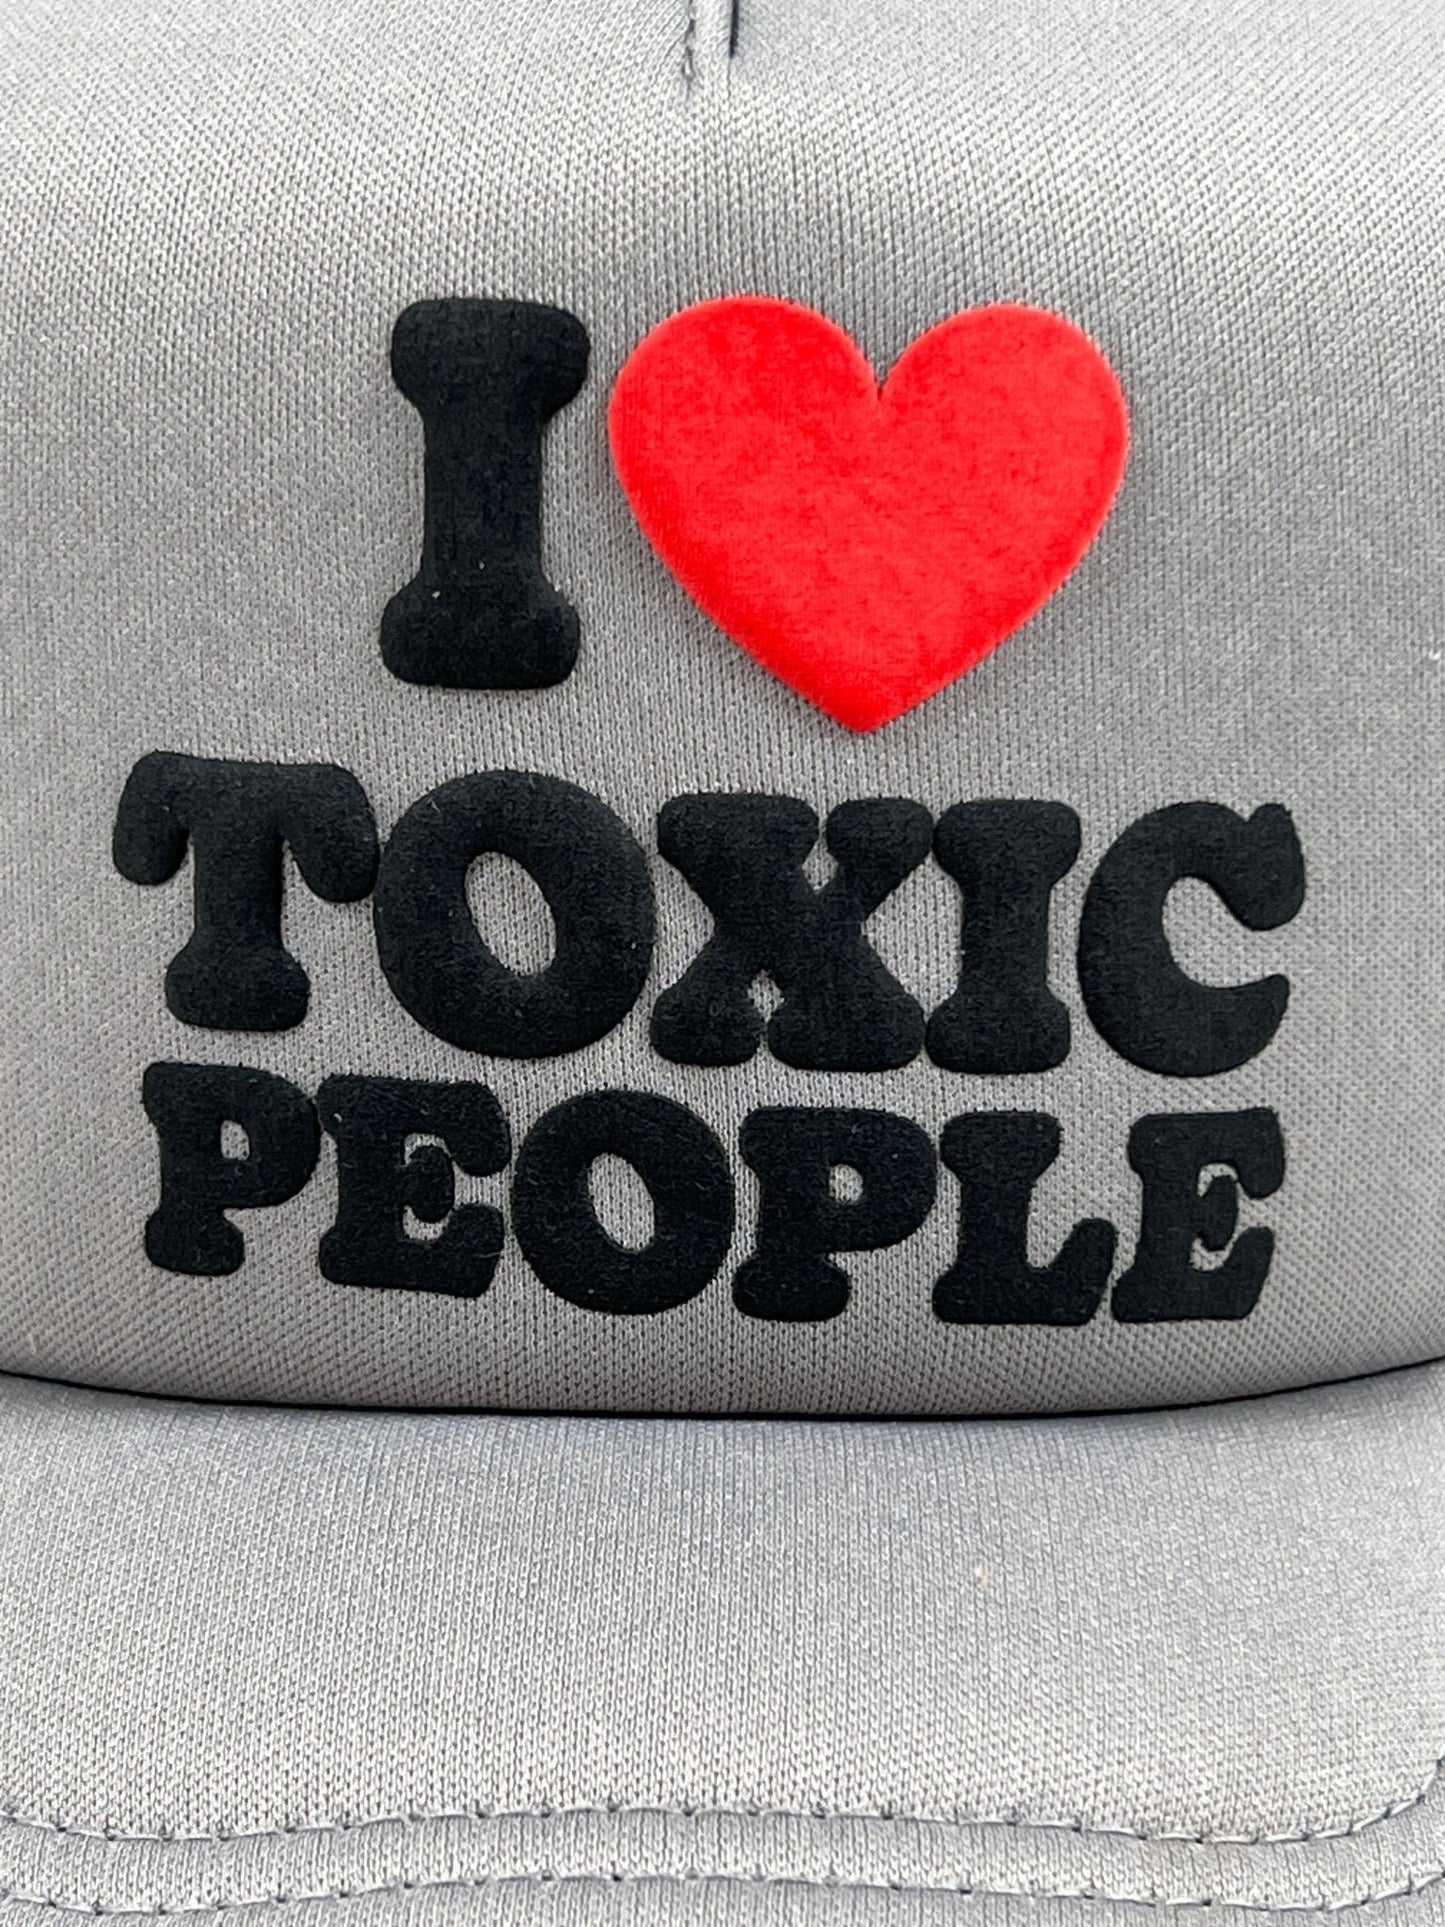 A PLEASURES TOXIC TRUCKER CAP GREY, featuring the bold text "I ♥ TOXIC PEOPLE" in black and red letters, makes for a stylish accessory perfect for casual outings.